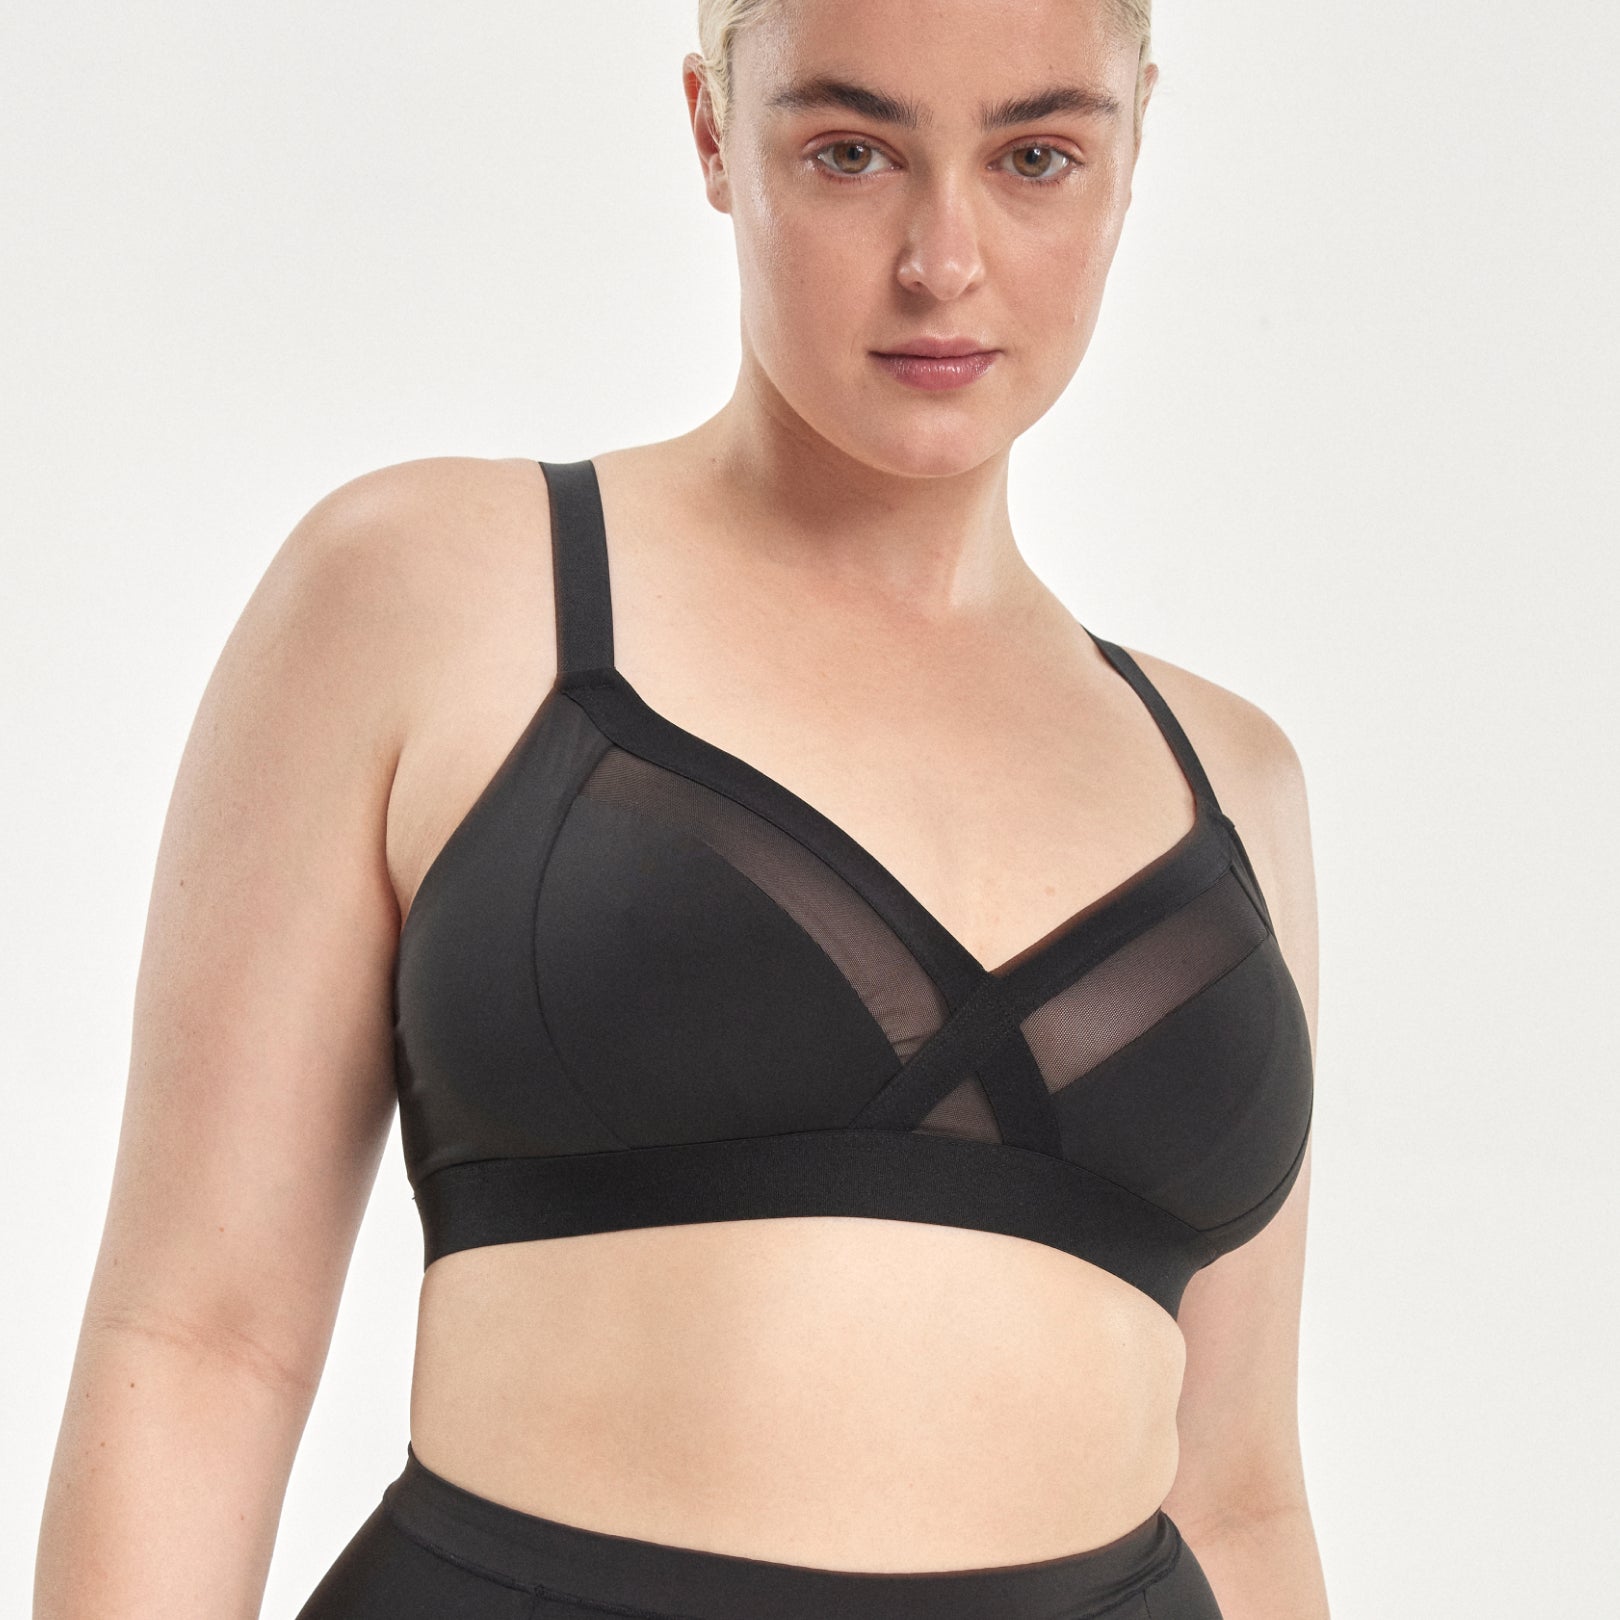 Wireless bras with good support - 21 products